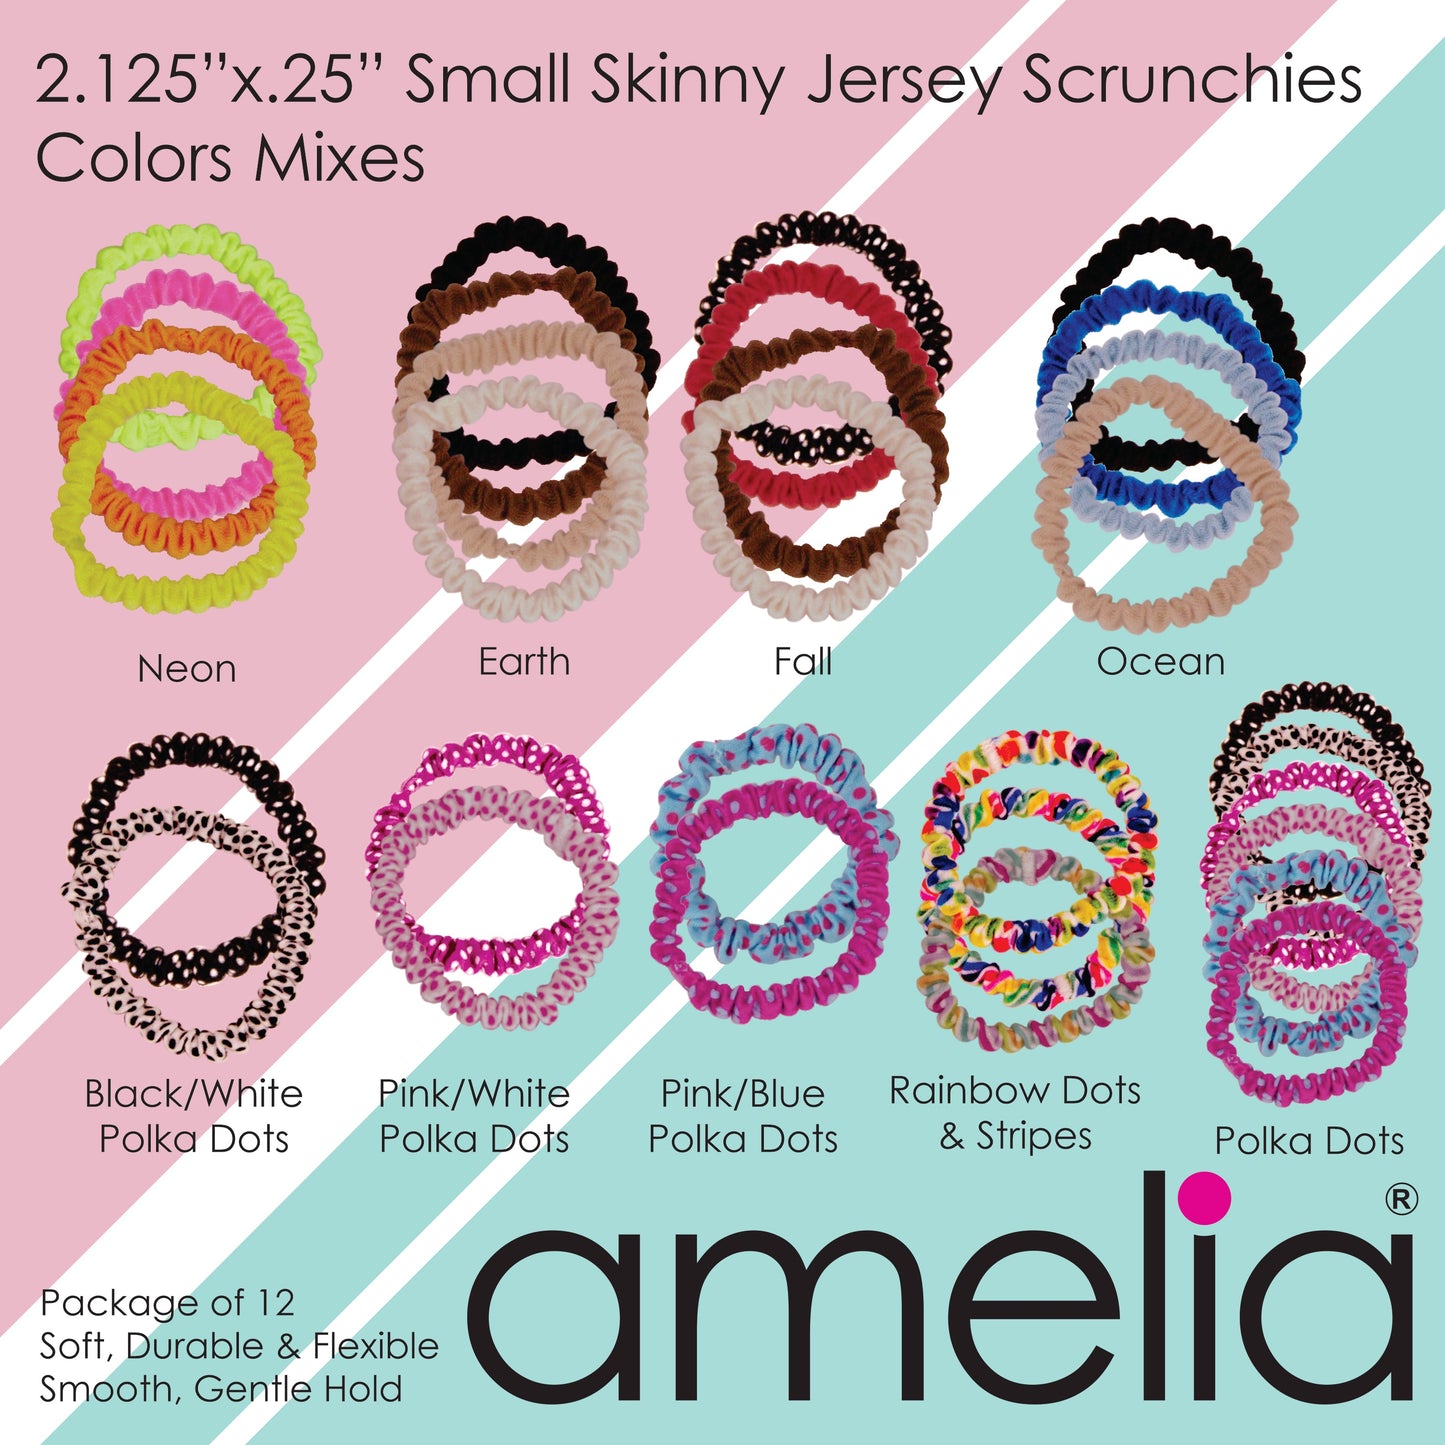 Amelia Beauty, Pink and Blue Polka Dot Mix Skinny Jersey Scrunchies, 2.125in Diameter, Gentle on Hair, Strong Hold, No Snag, No Dents or Creases. 12 Pack